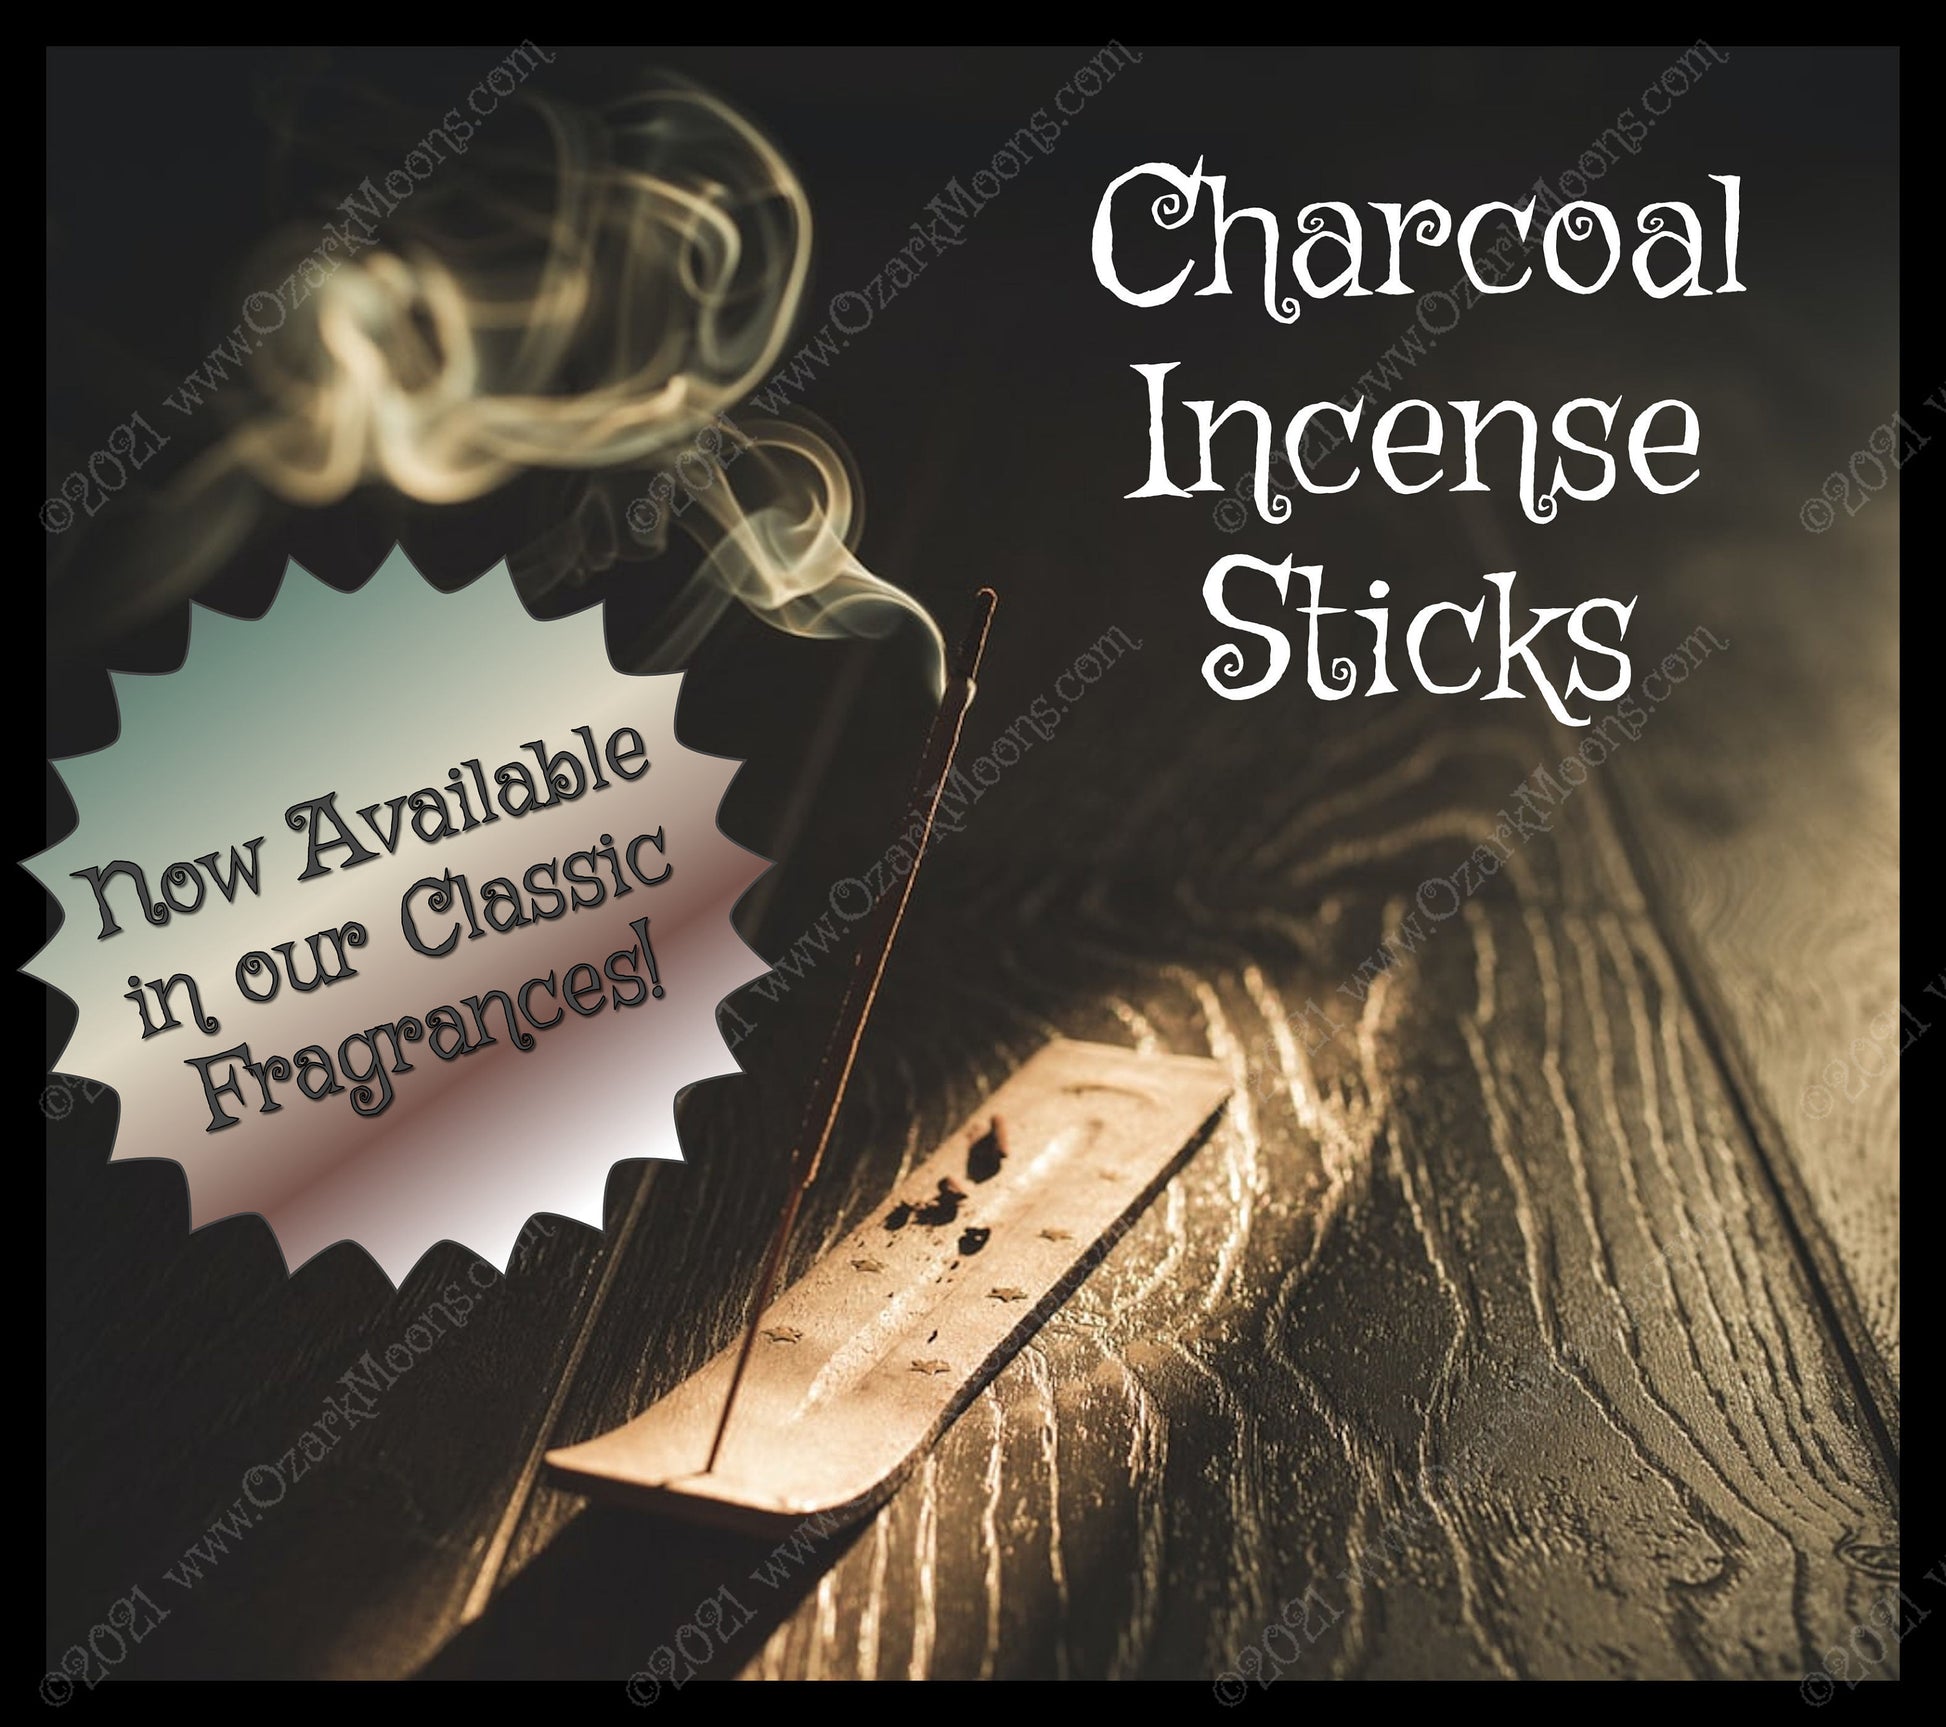 ZODIAC Charcoal Incense Cones, Jumbo Cones, or Sticks In Your Choice of Scents - Clean Burning With No Wood Filler - Made to Order